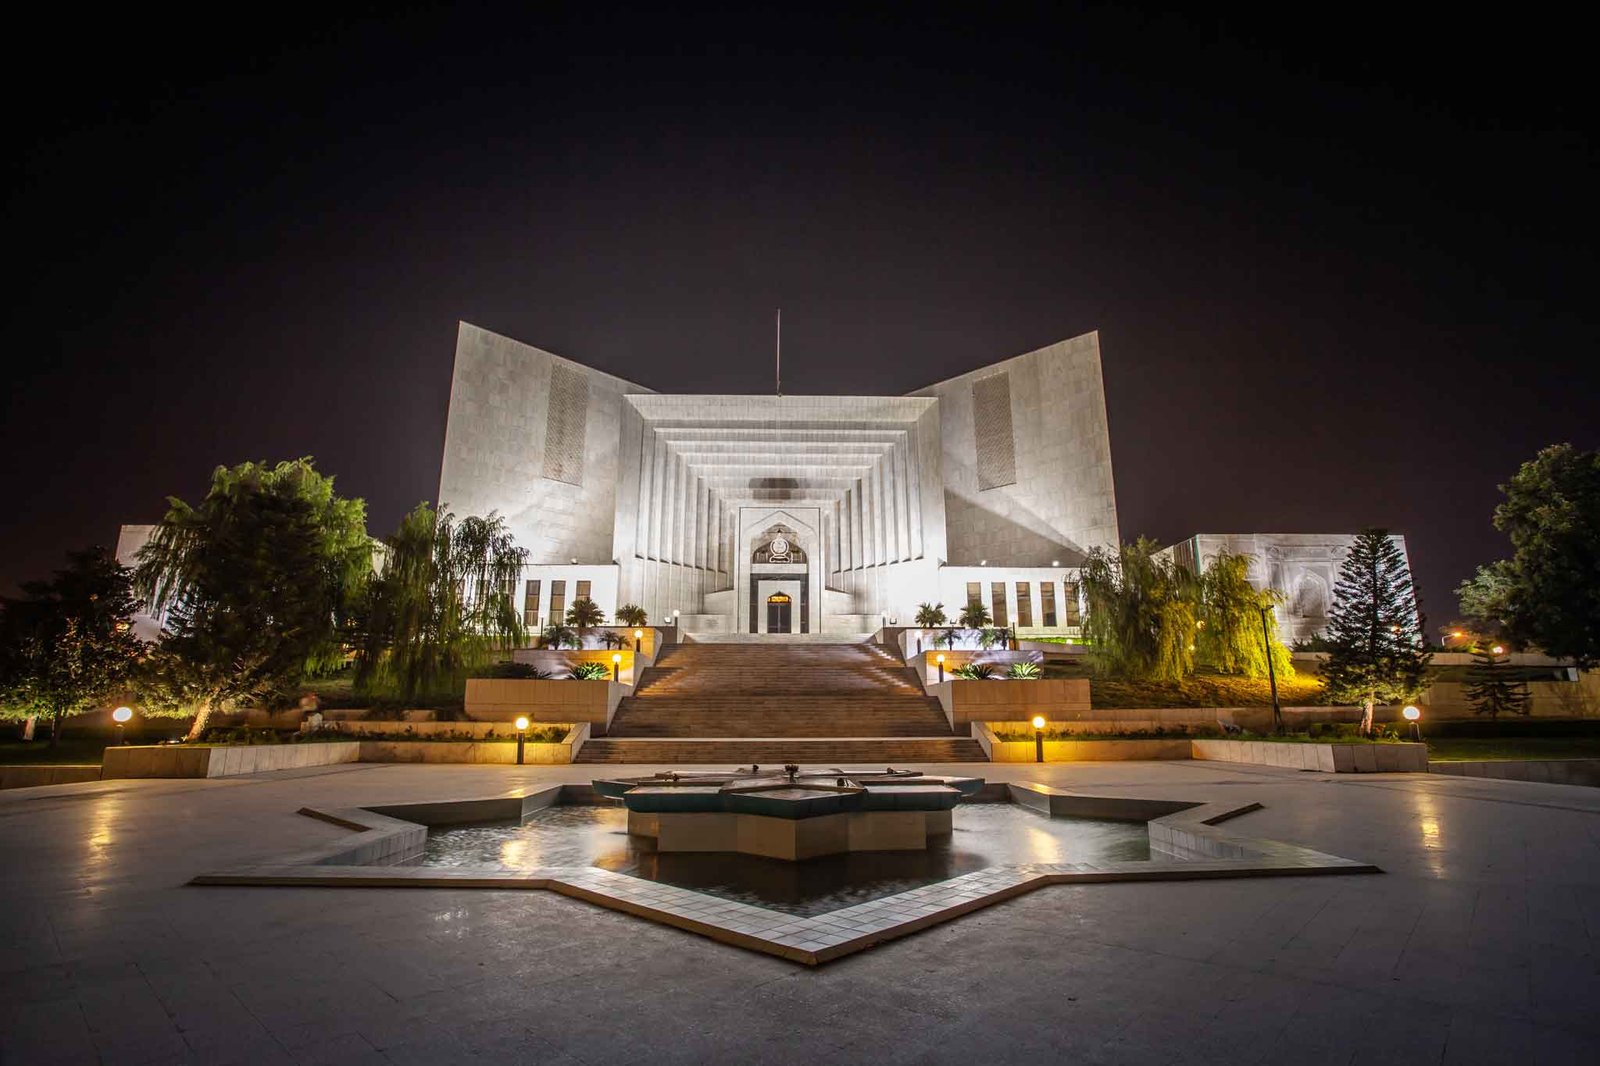 SC orders removal of encroachments from public Roads and pavements within three days